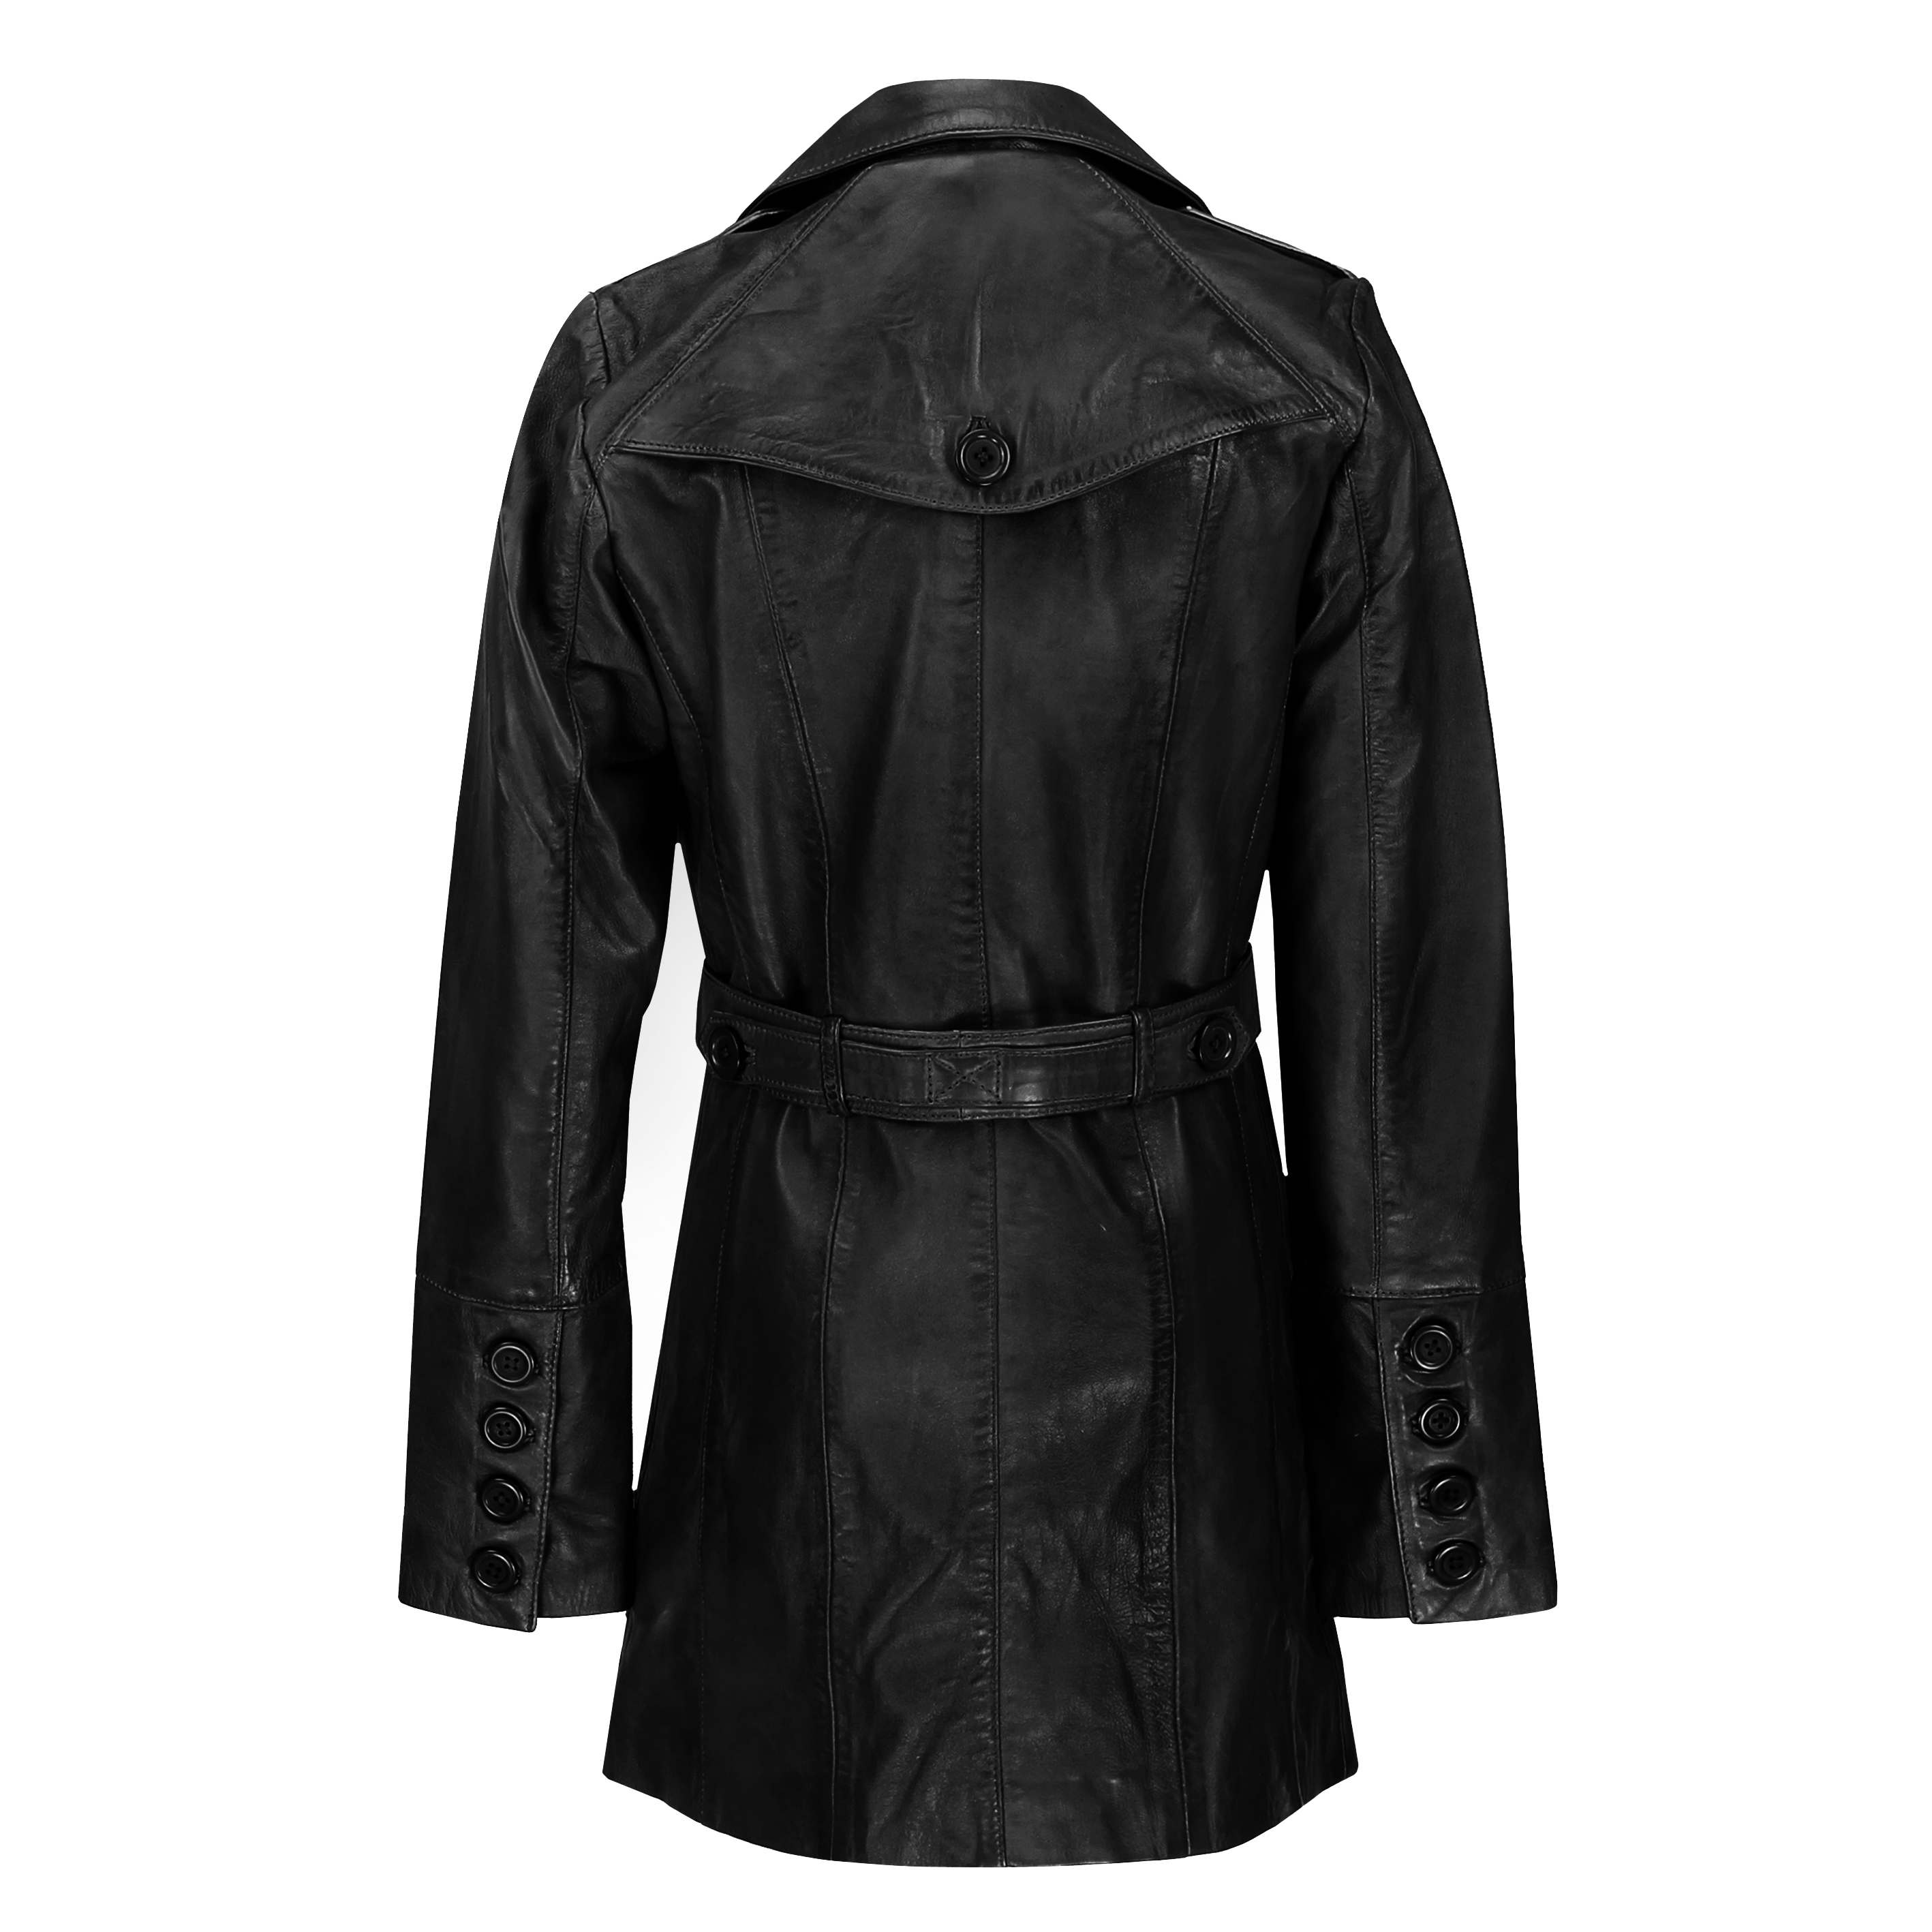 PRAGUE Ladies Real Leather Belted Jacket Black Nappa Classic Mid Length Jacket 